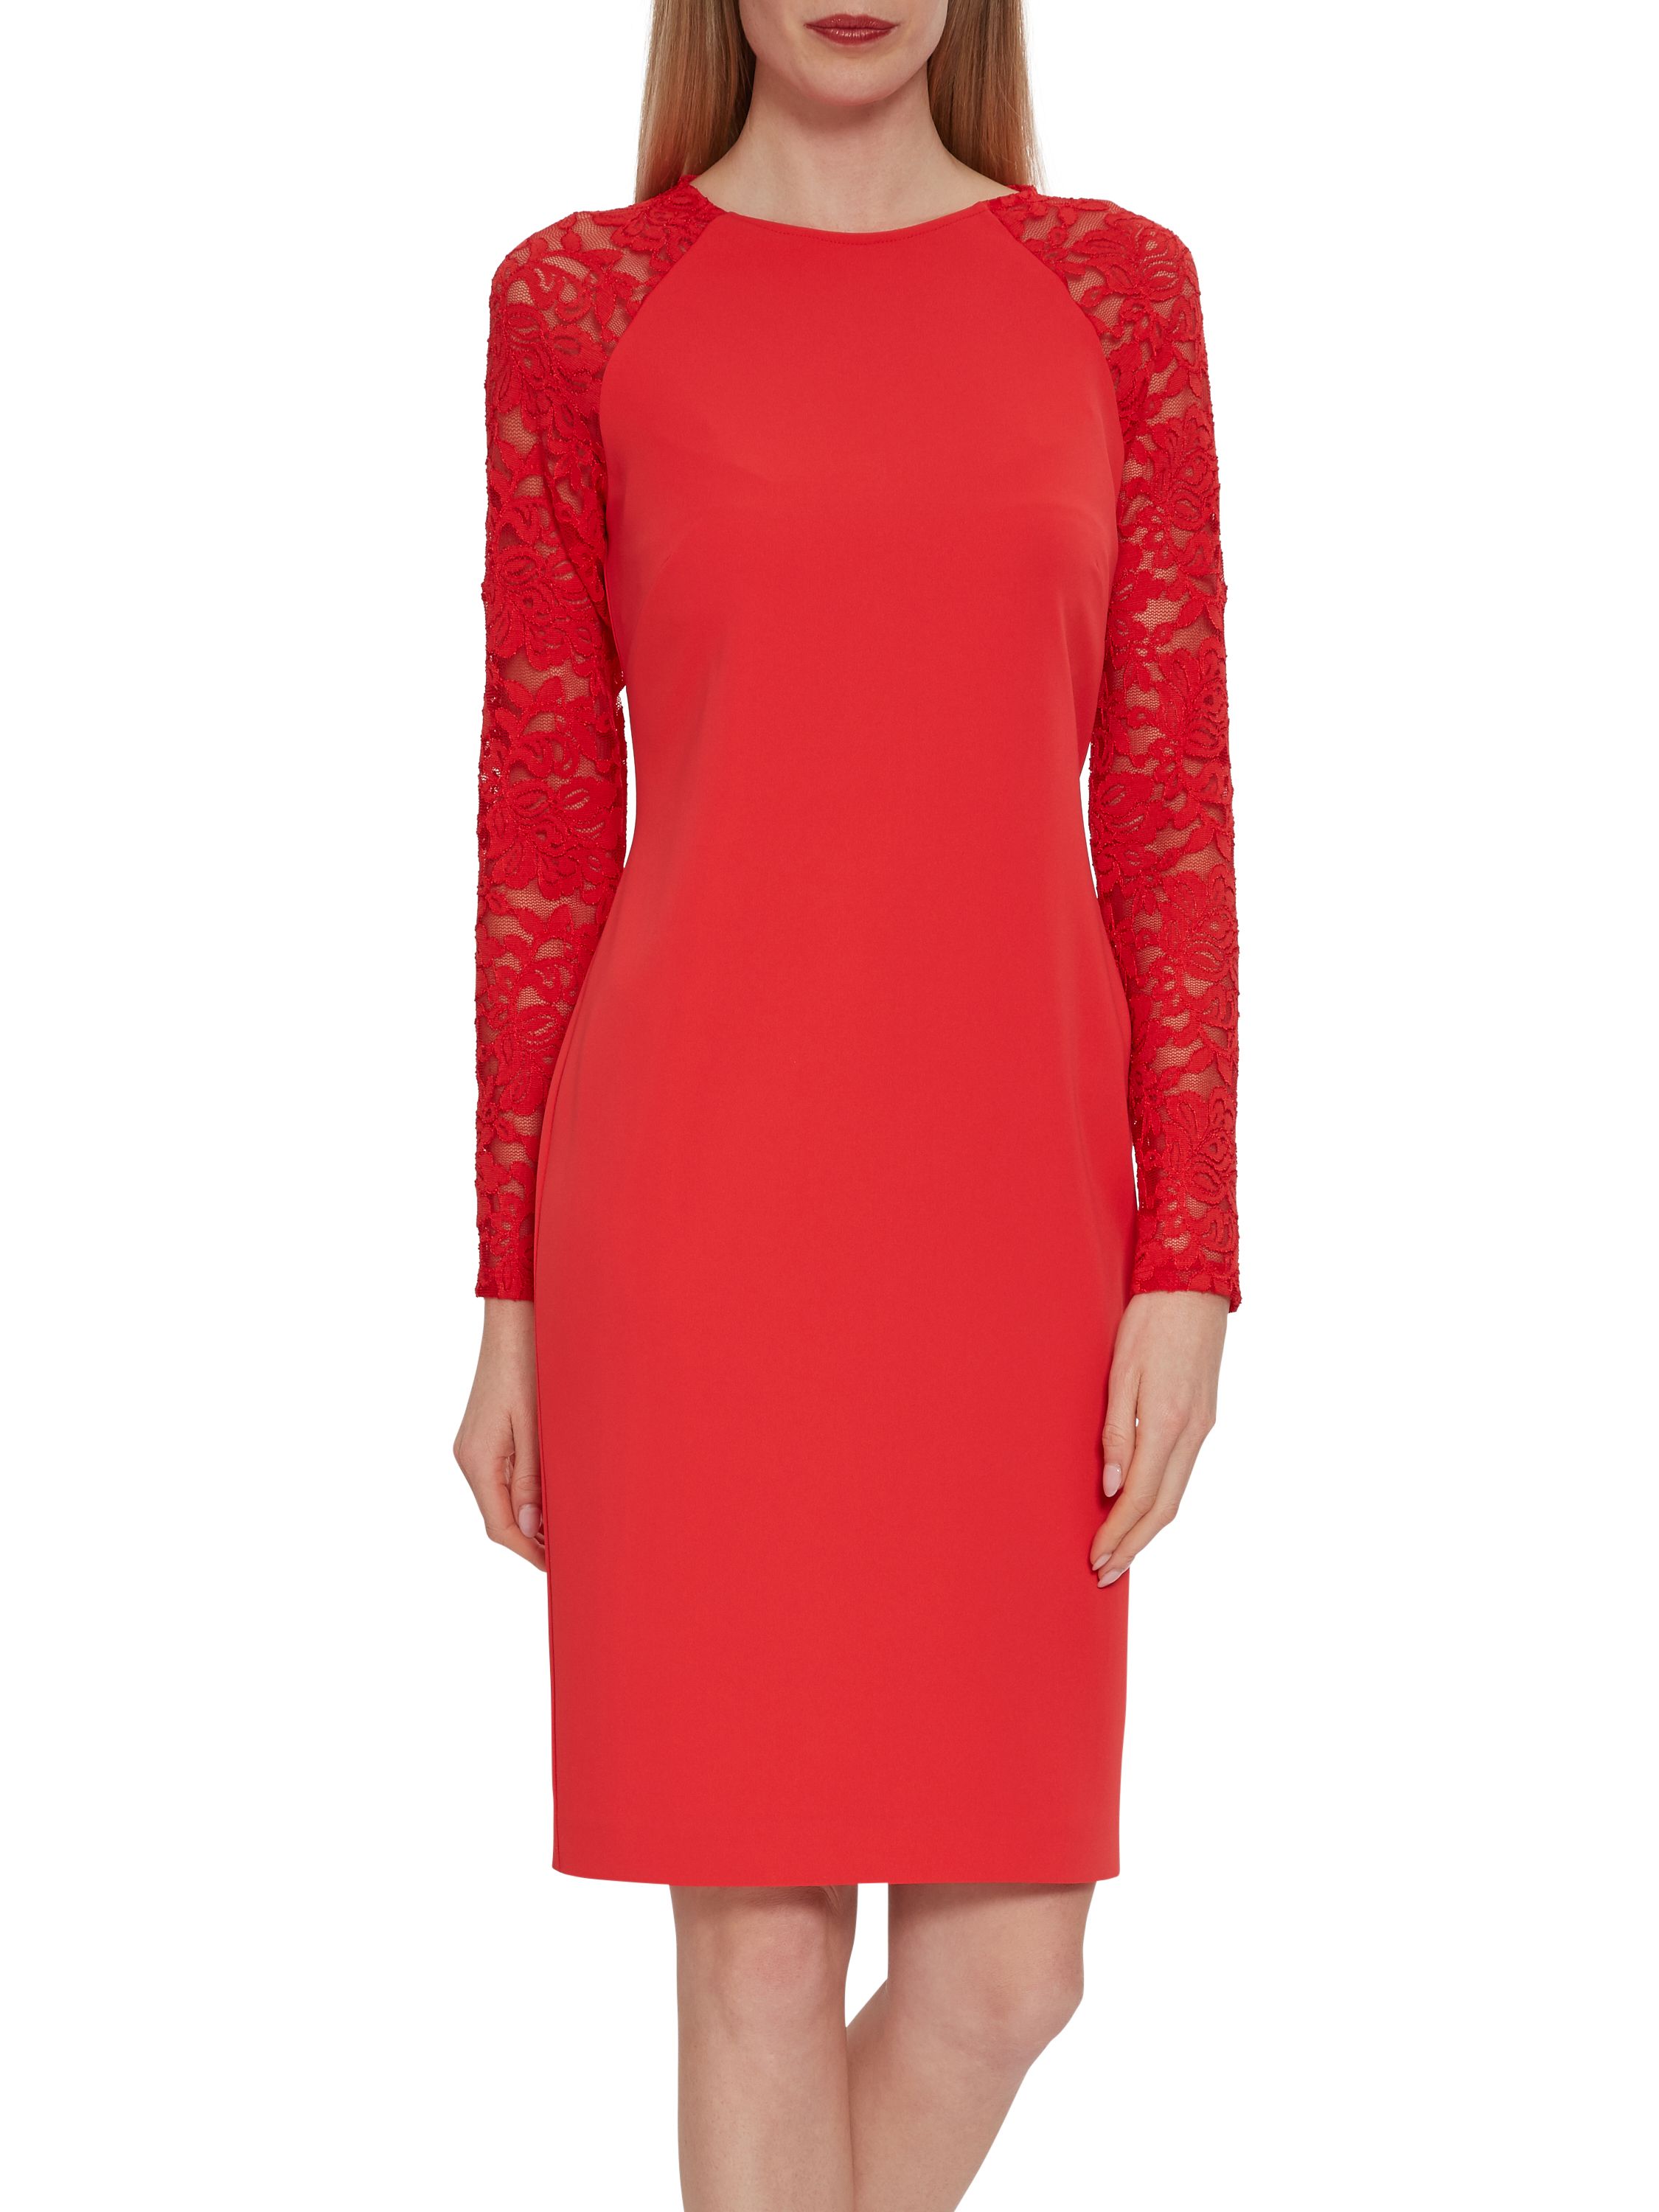 Gina Bacconi presents its stunning crepe and lace dress. This perfect occasionwear piece is comprised of a classic shift dress with sheer dainty floral lace sleeves. This beautiful dress is perfect for a summer party or special occasion. The dress is part